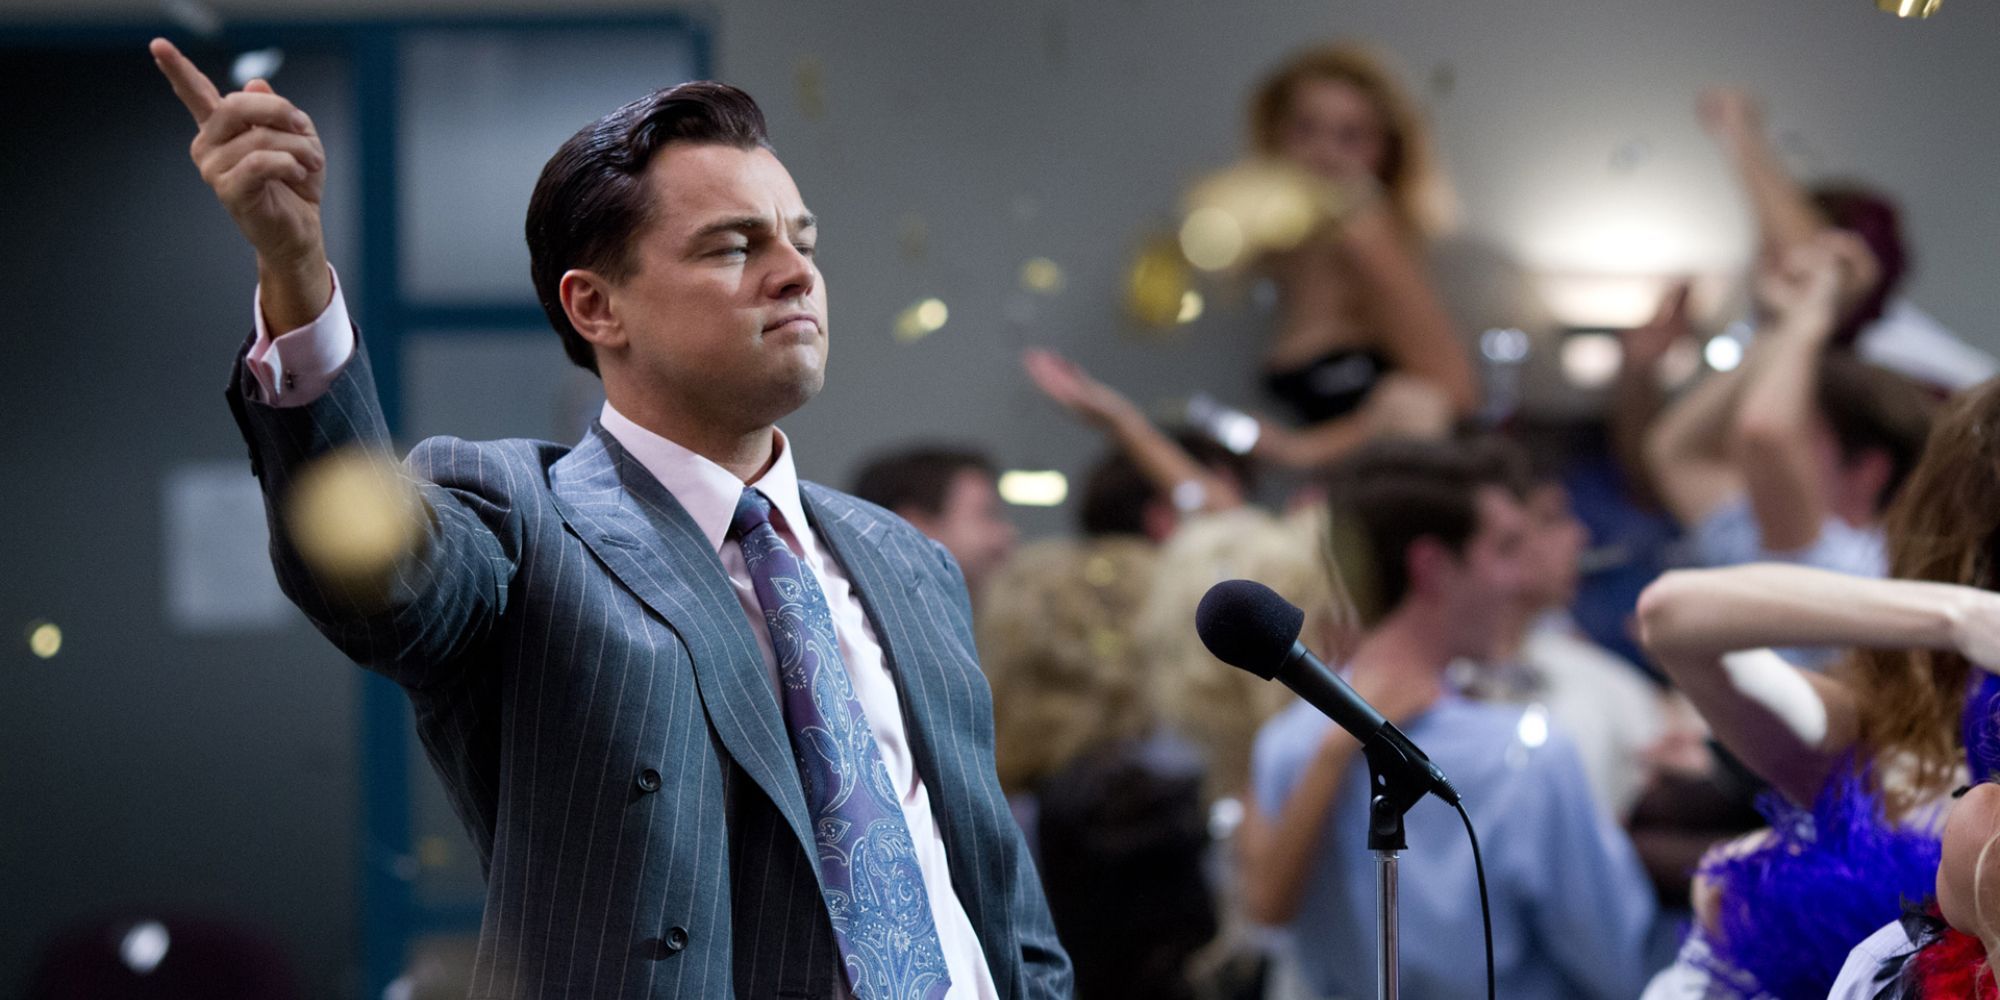 Leonardo DiCaprio as Jordan Belfort raising his hand while addressing a cheering crowd in The Wolf of Wall Street (2013)